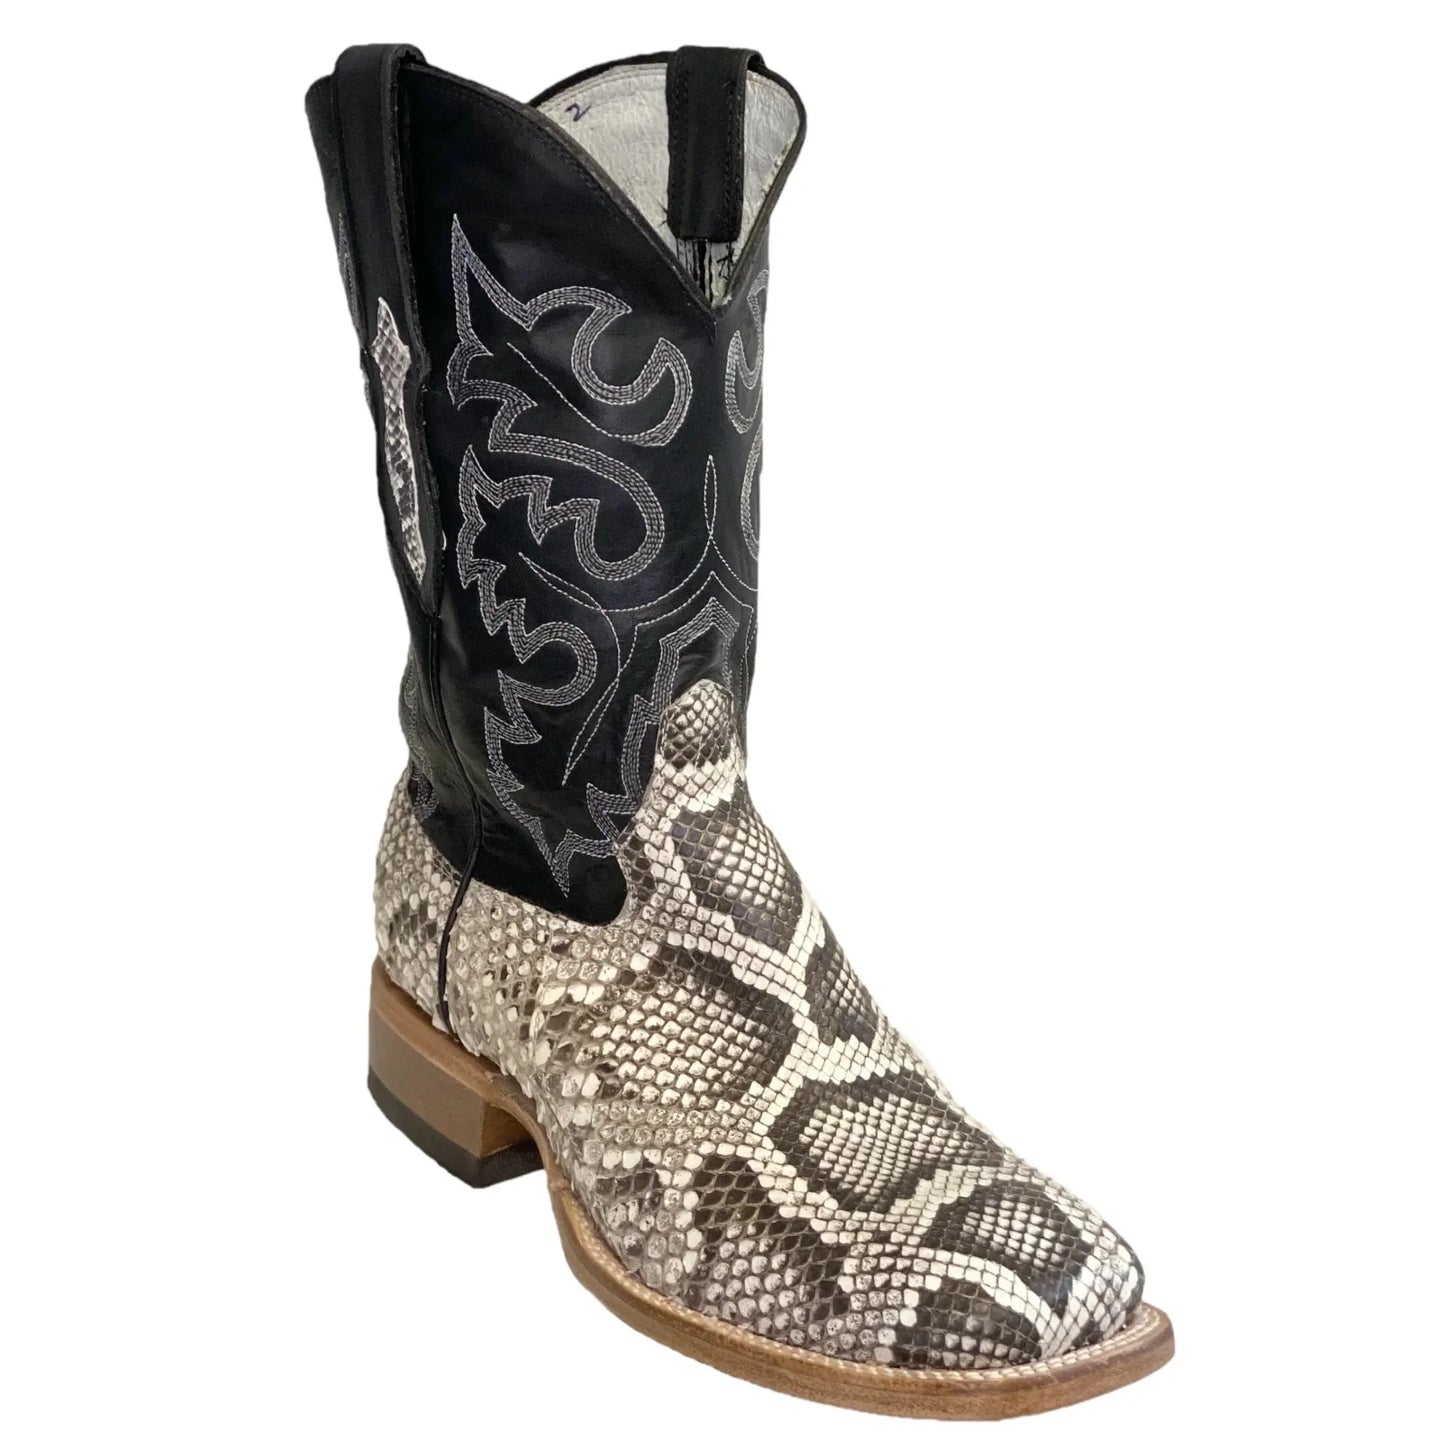 COWTOWN BOOT CO. MEN’S GENUINE NATURAL PYTHON WIDE SQUARE TOE Q809